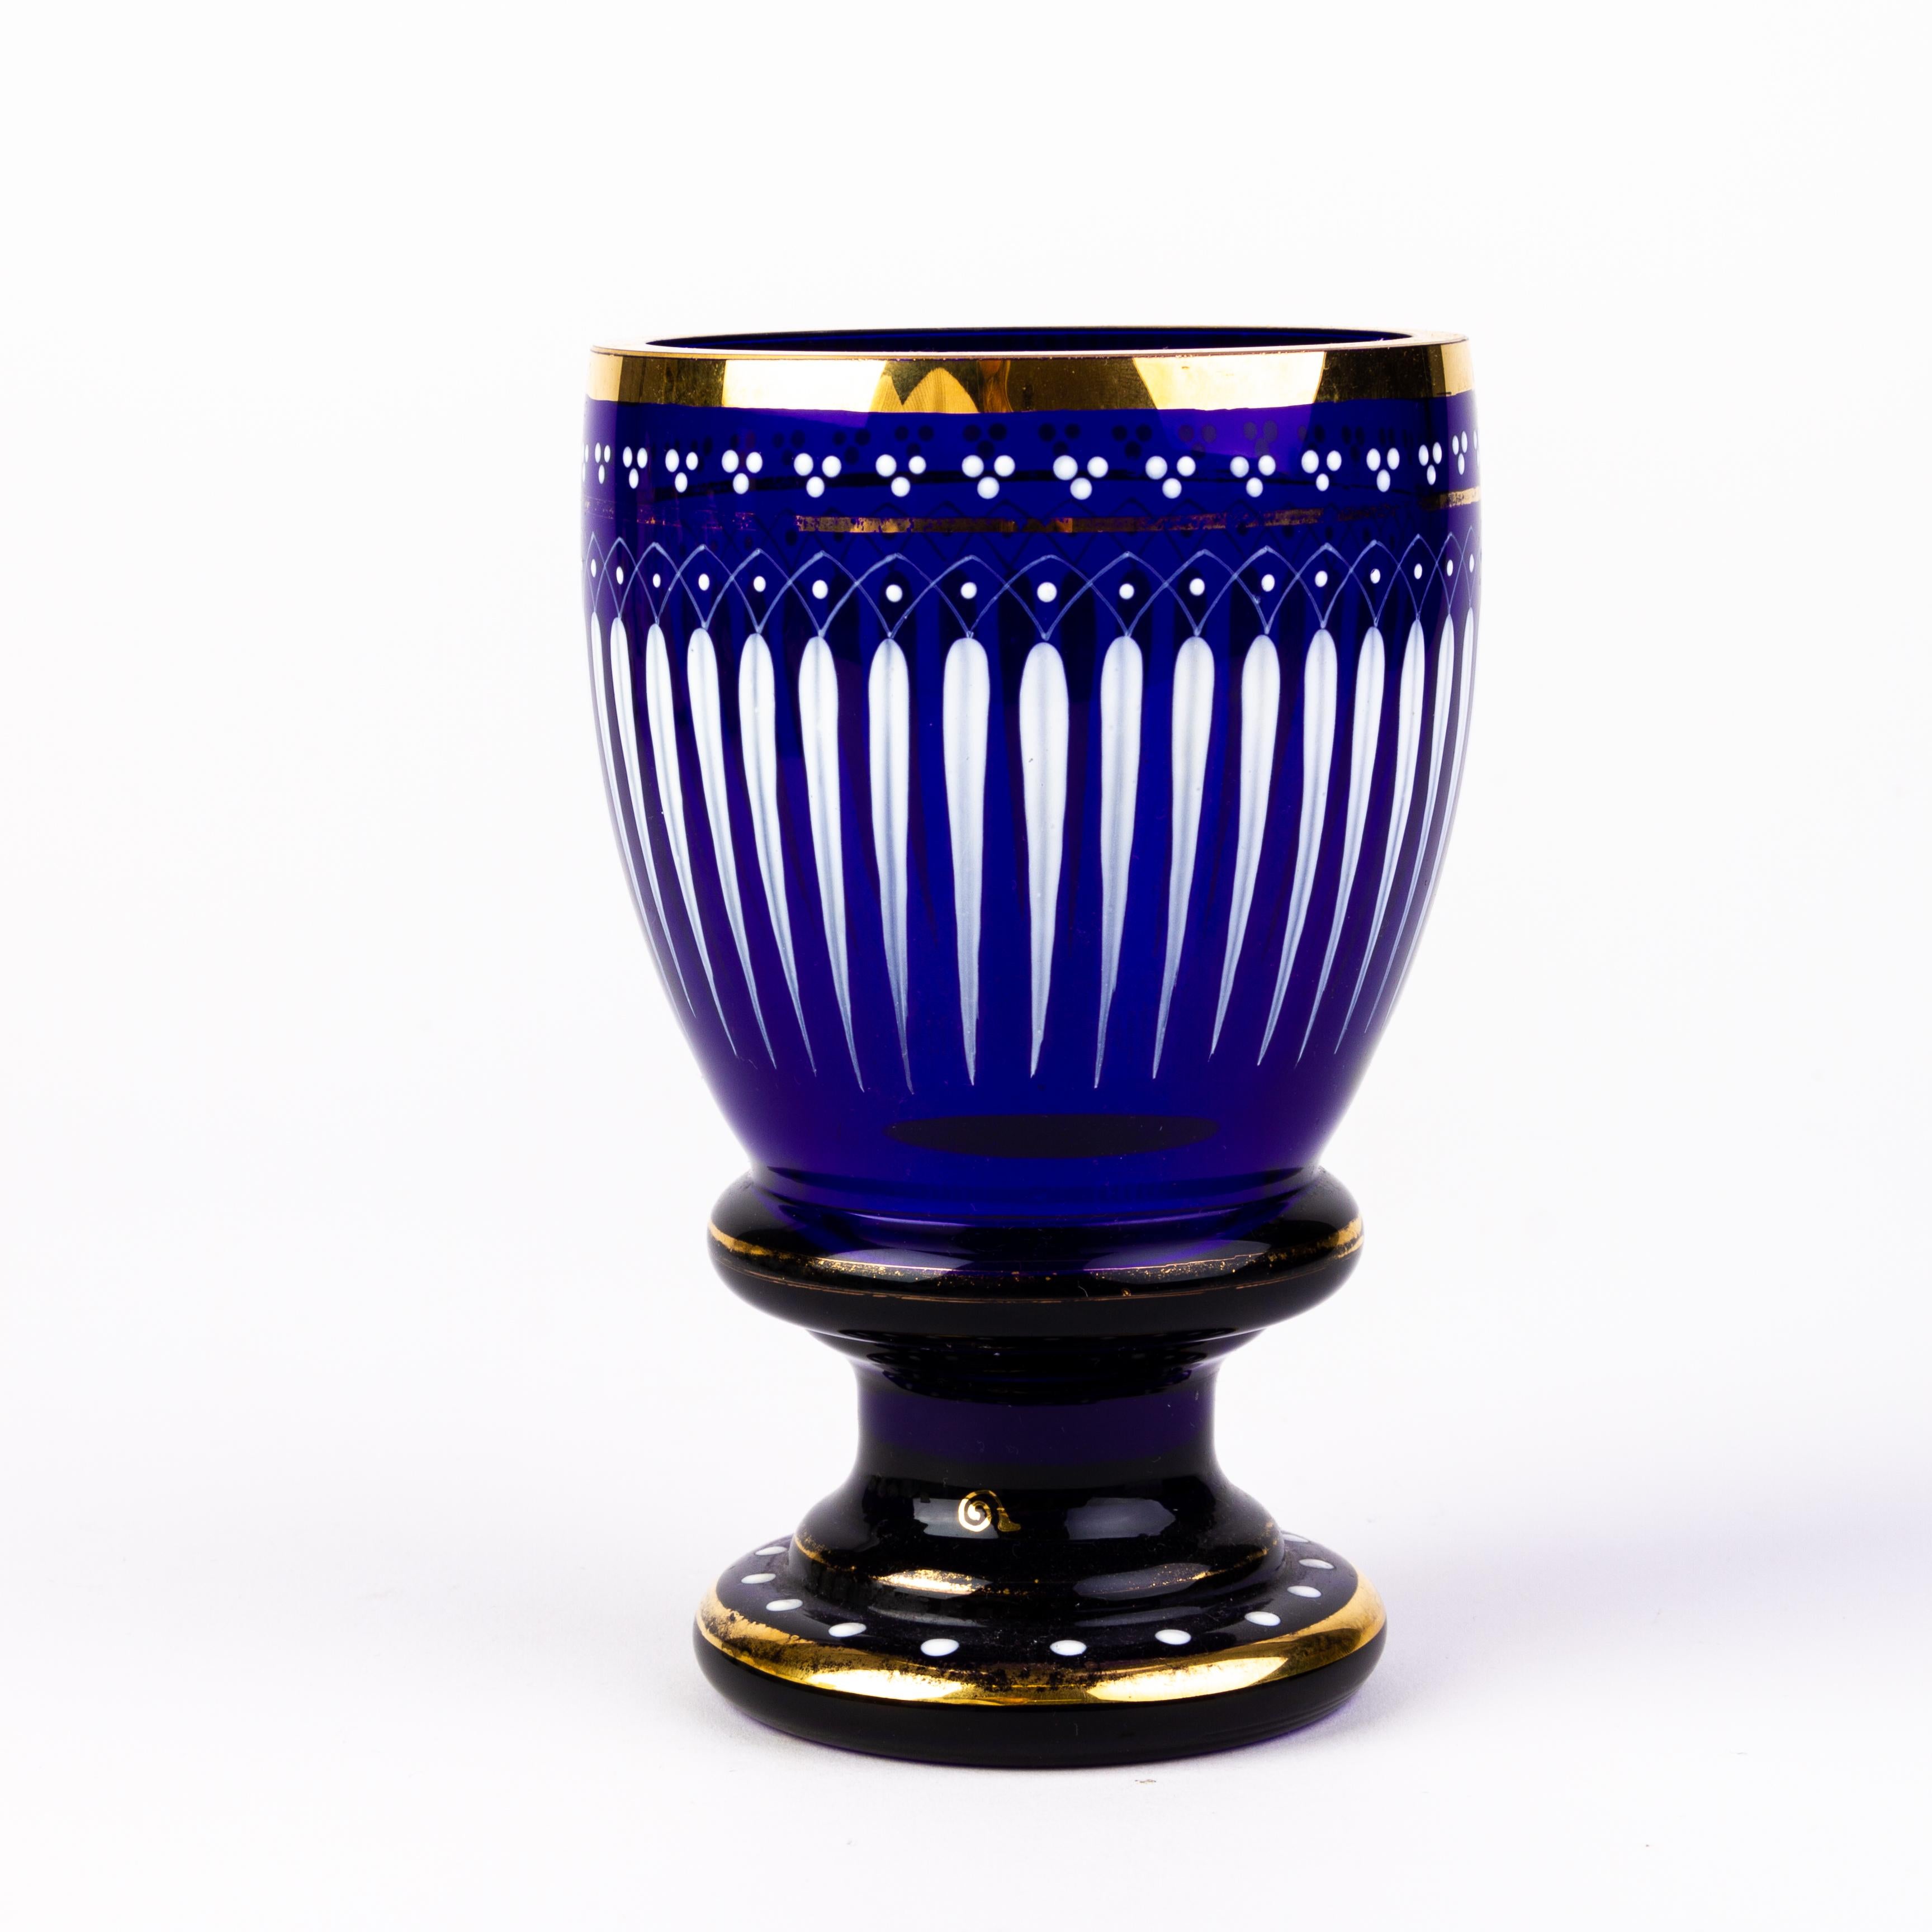 Enamel Painted Bristol Blue Glass Goblet with Gold Rims In Good Condition For Sale In Nottingham, GB